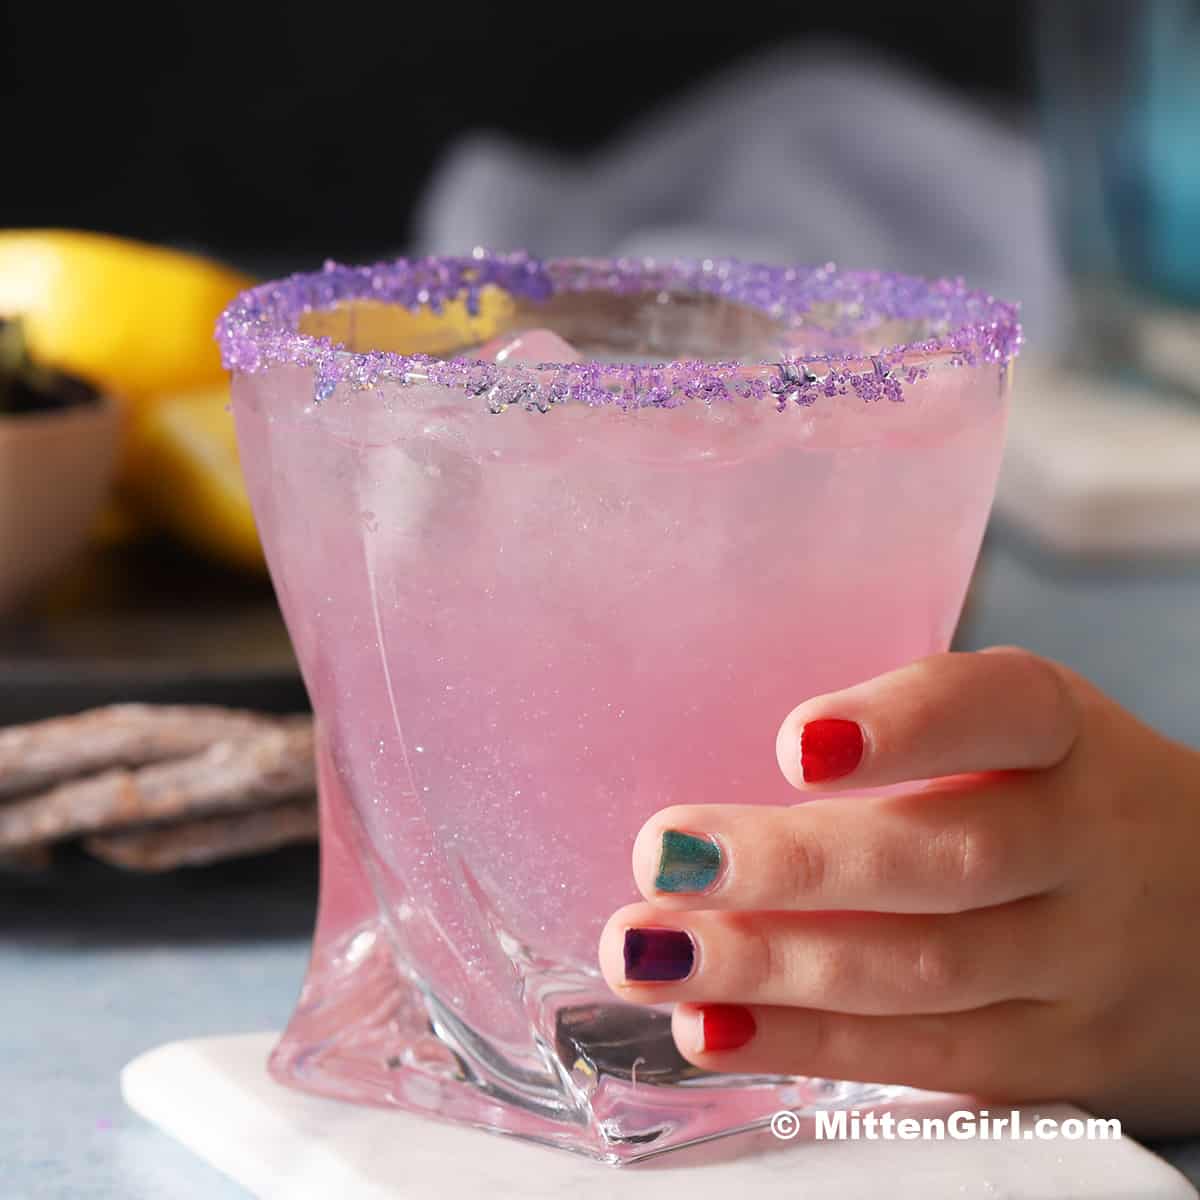 A small hand holding on to a glass of unicorn drink lemonade.